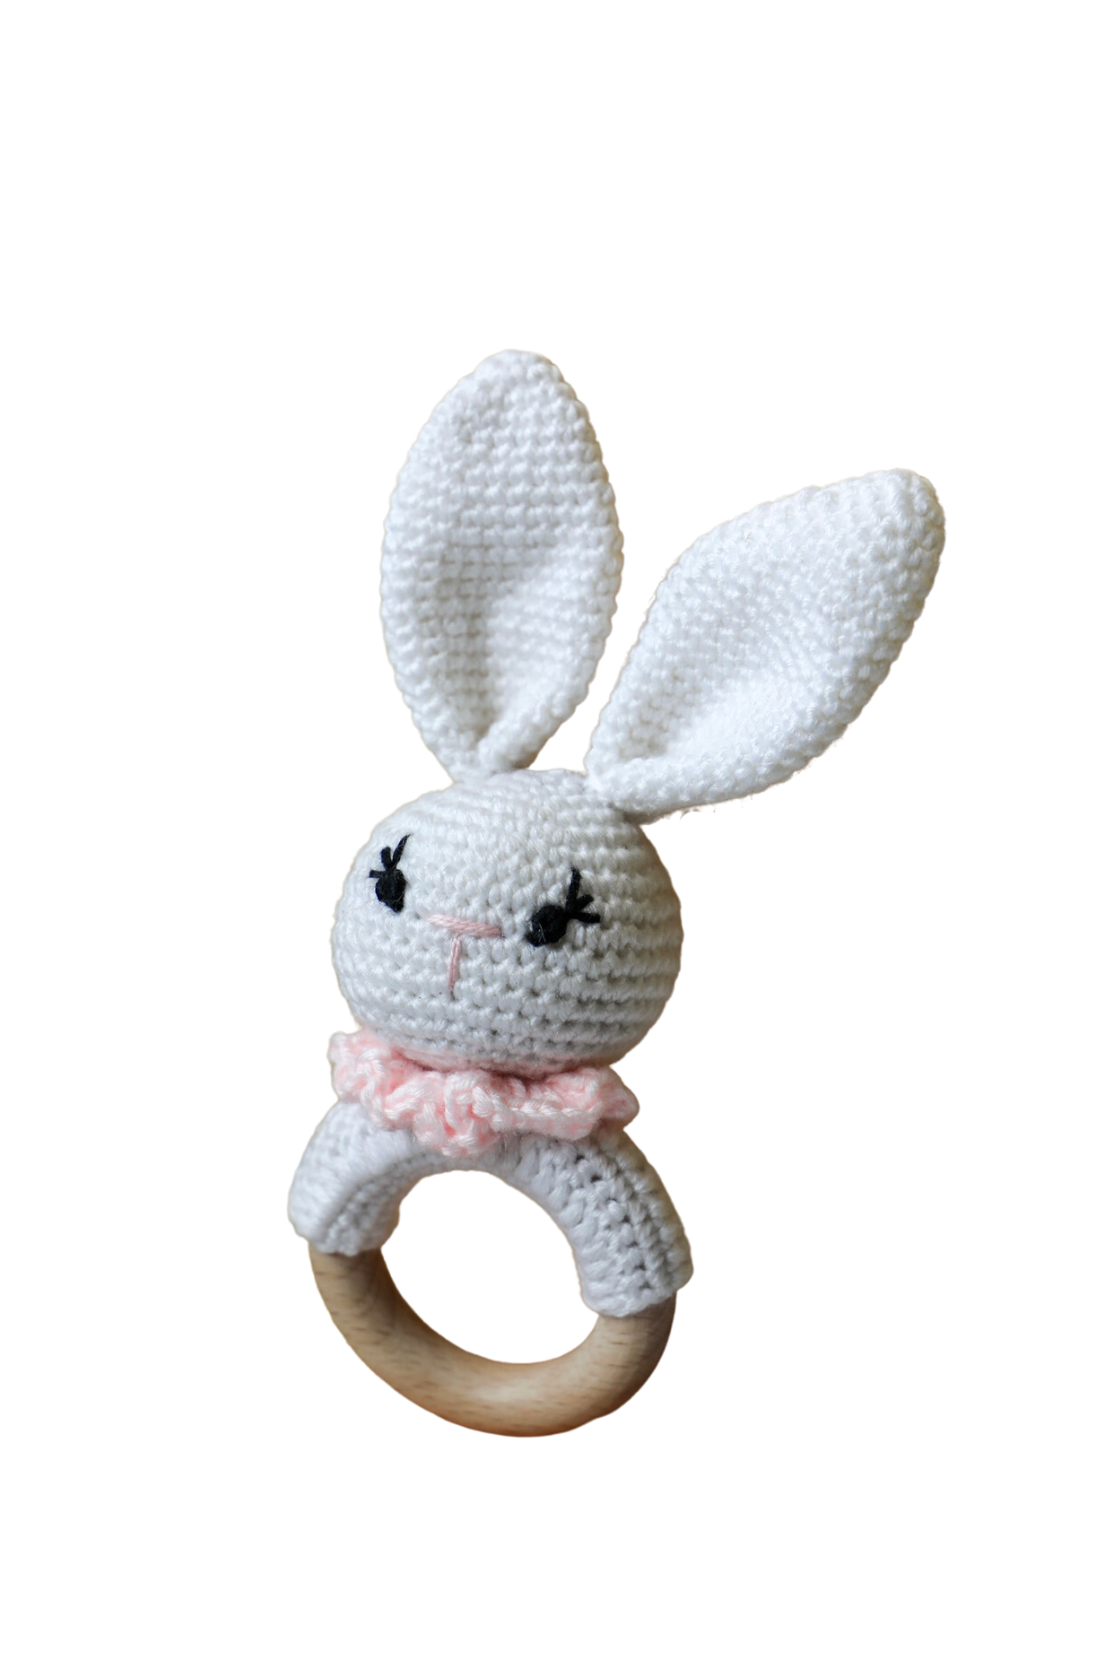 Delight your baby with a cuddly bunny that jingles and soothes their teething gums. A fluffy, bunny hug for your little one!